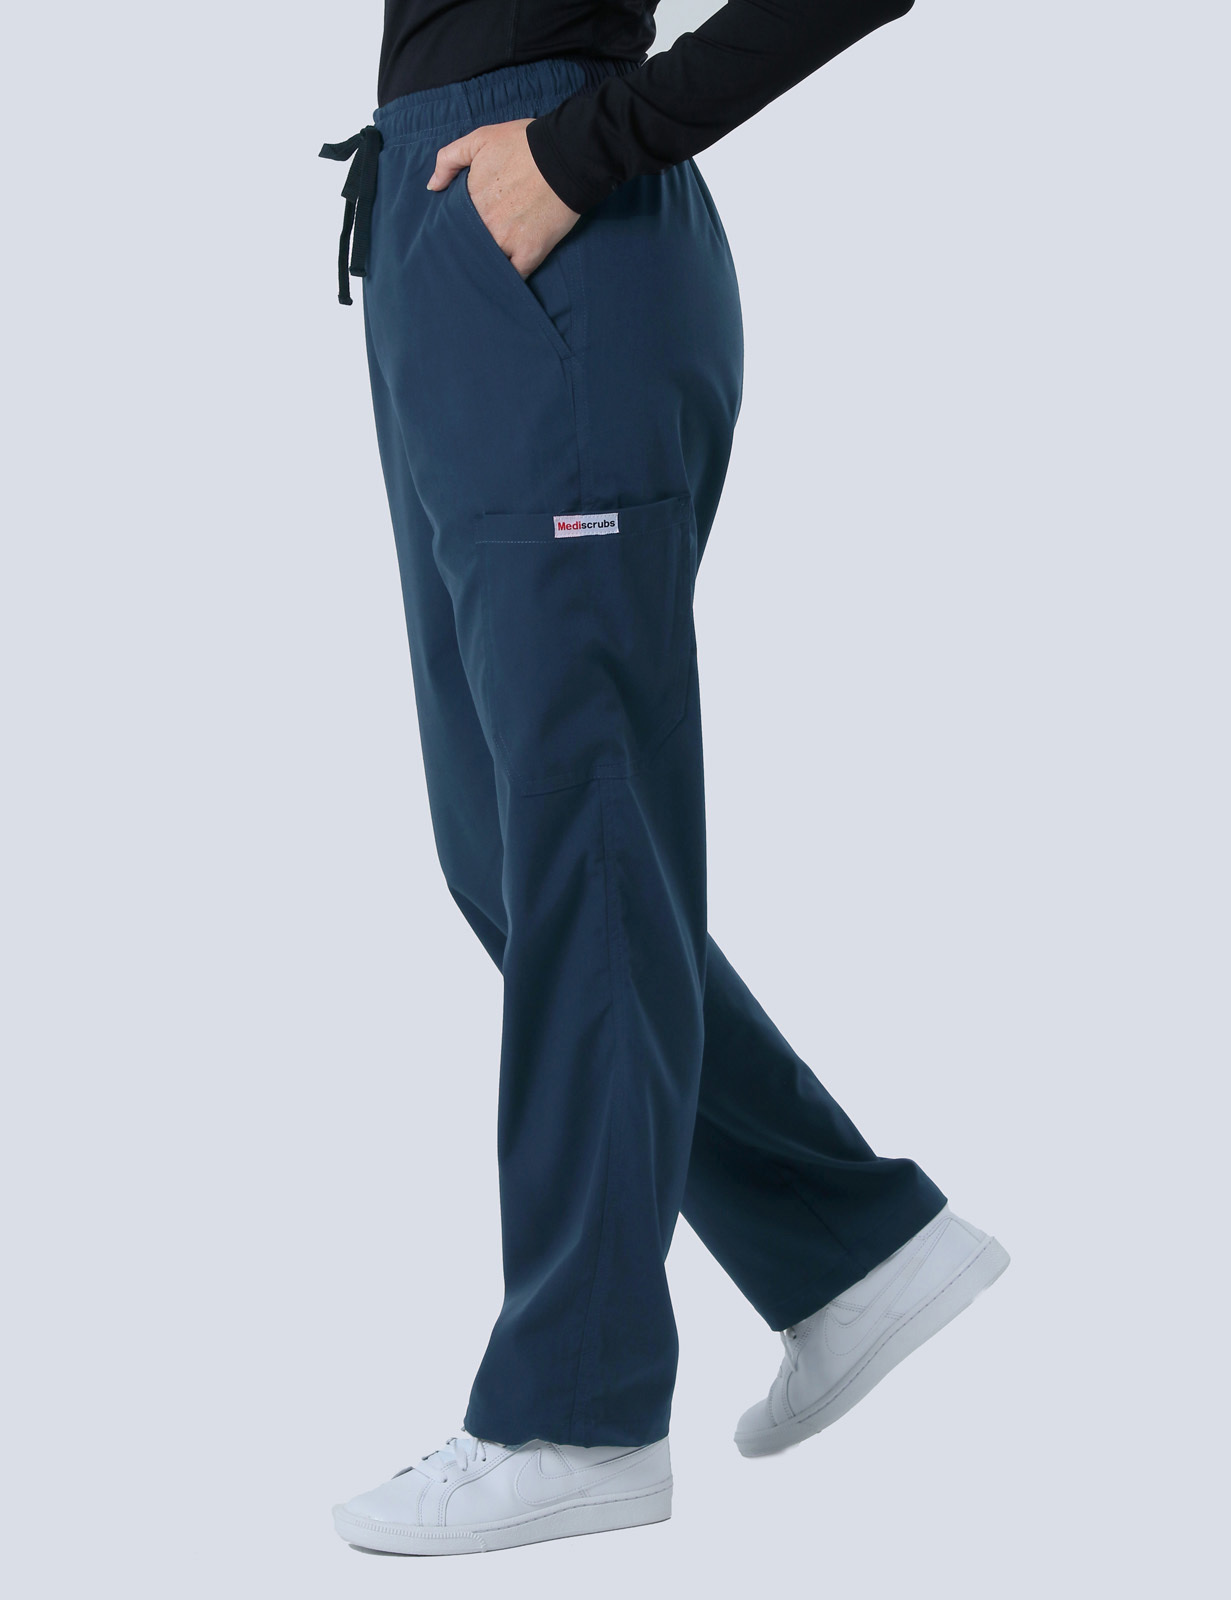 Maleny Hospital - Registered Nurse (Women's Fit Solid Scrub Top and Cargo Pants in Navy incl Logos)